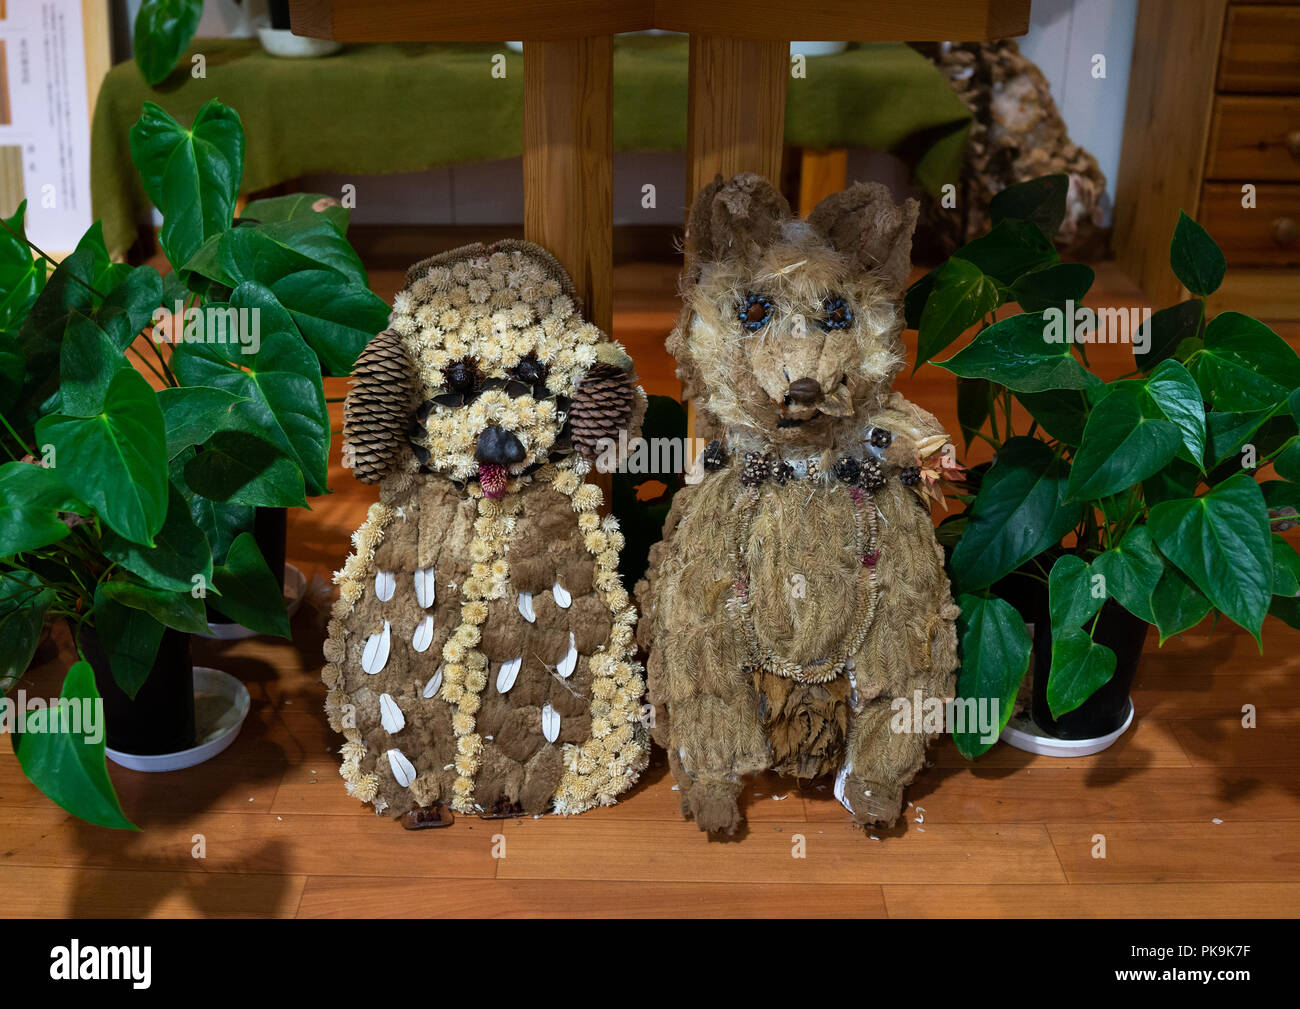 Dogs sculptures made with dried herbs and plants, Kansai region, Kyoto, Japan Stock Photo